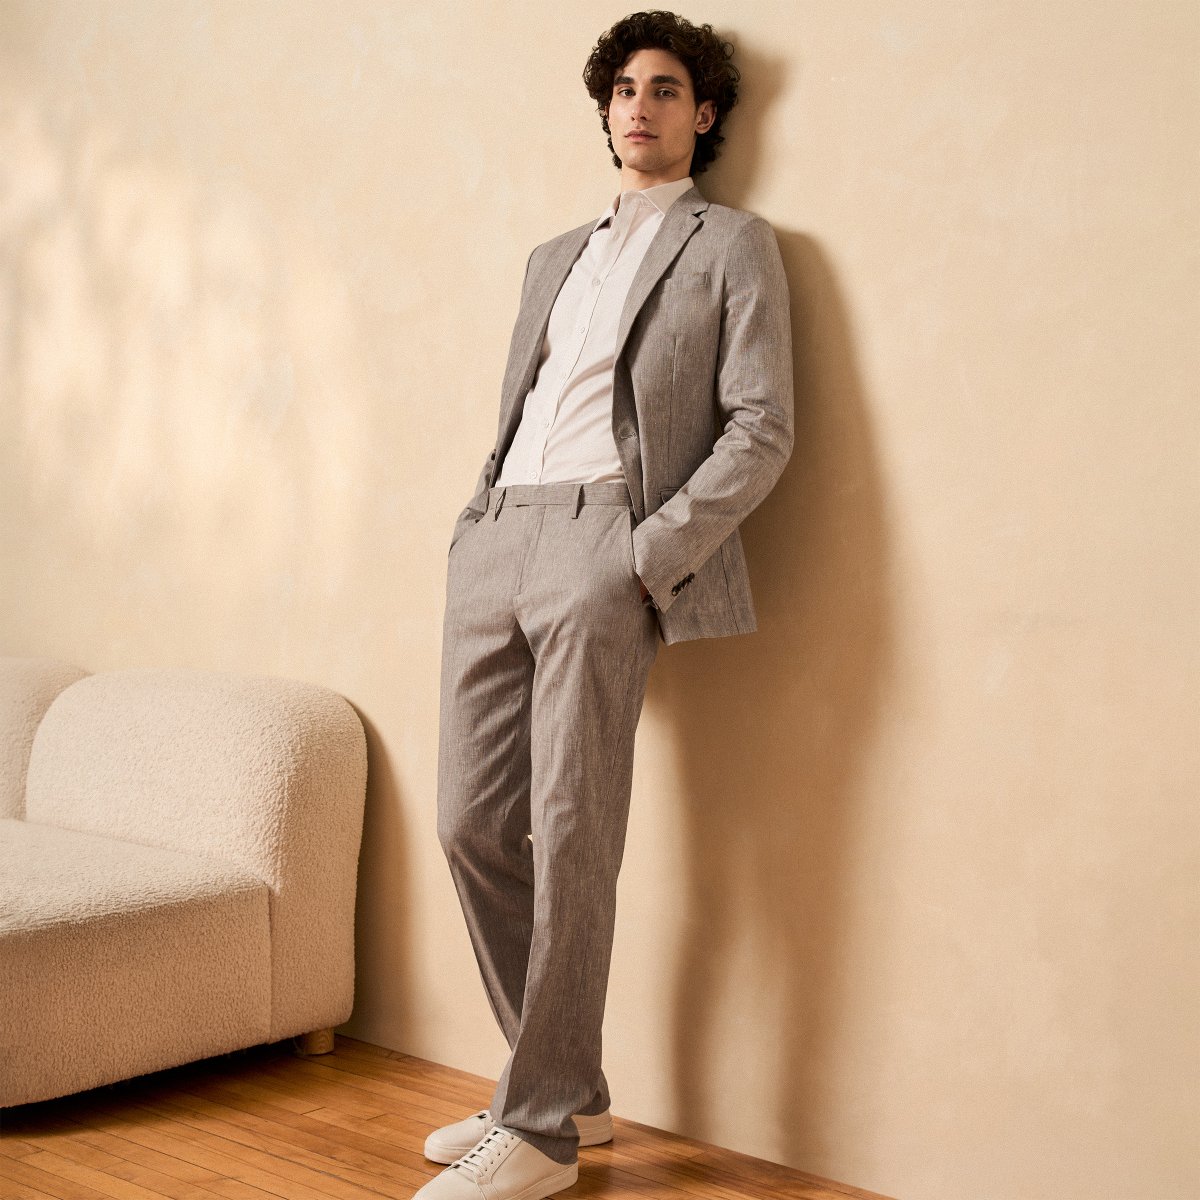 Airy, elegant and timeless, linen will make even the warmest of wedding days a breeze. 

Model Height: 6'4'
Top: 42T
Bottom: 34X36
.
.
.
#americantall #wethetall #tallmen #tallguy #tallclothing #tallstyle #teamtall #menswear #menstyle #summerstyle